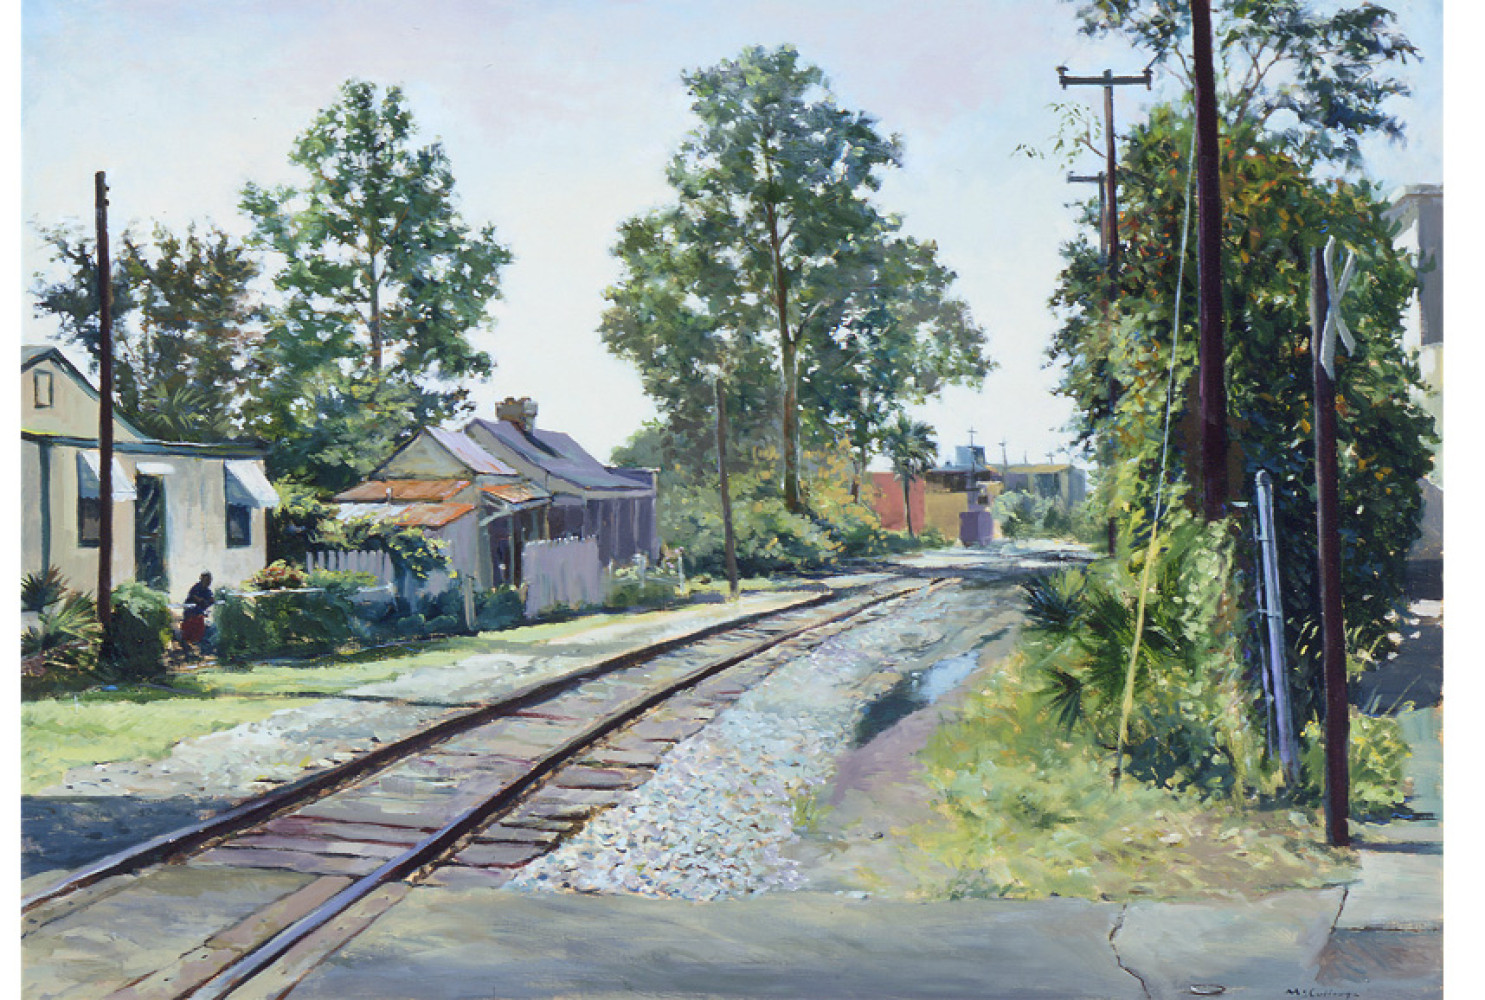 Line Street Railroad Crossing, 1991, By William McCullough (American, b. 1948); Oil on canvas; 30 1/2 x 40 1/4 inches; Museum purchase; 2001.025
